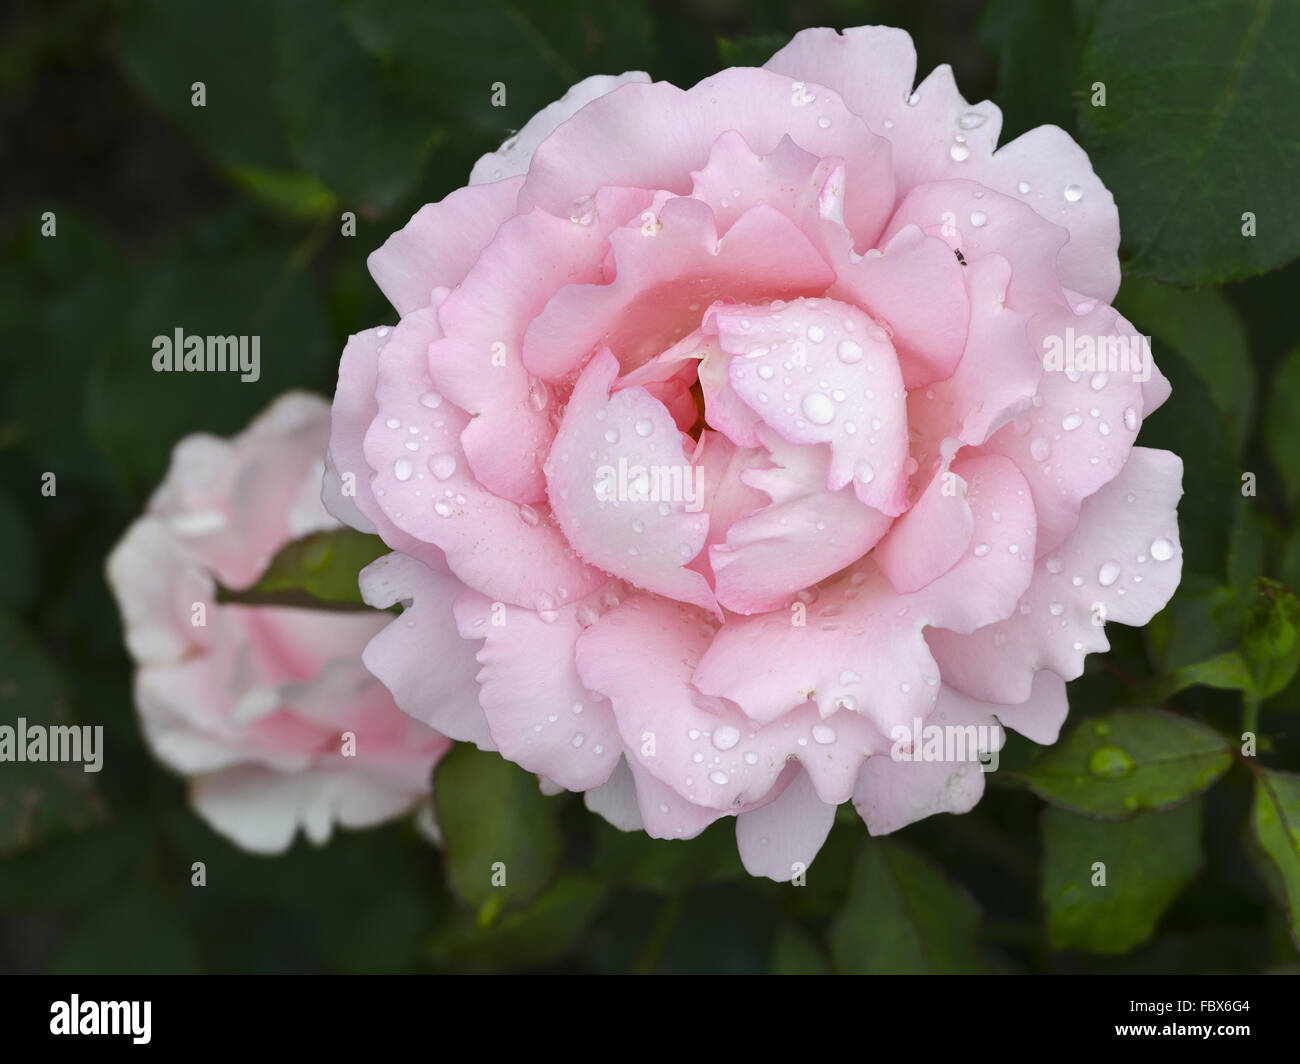 blossom of a rose Badener Trotters Champion Stock Photo